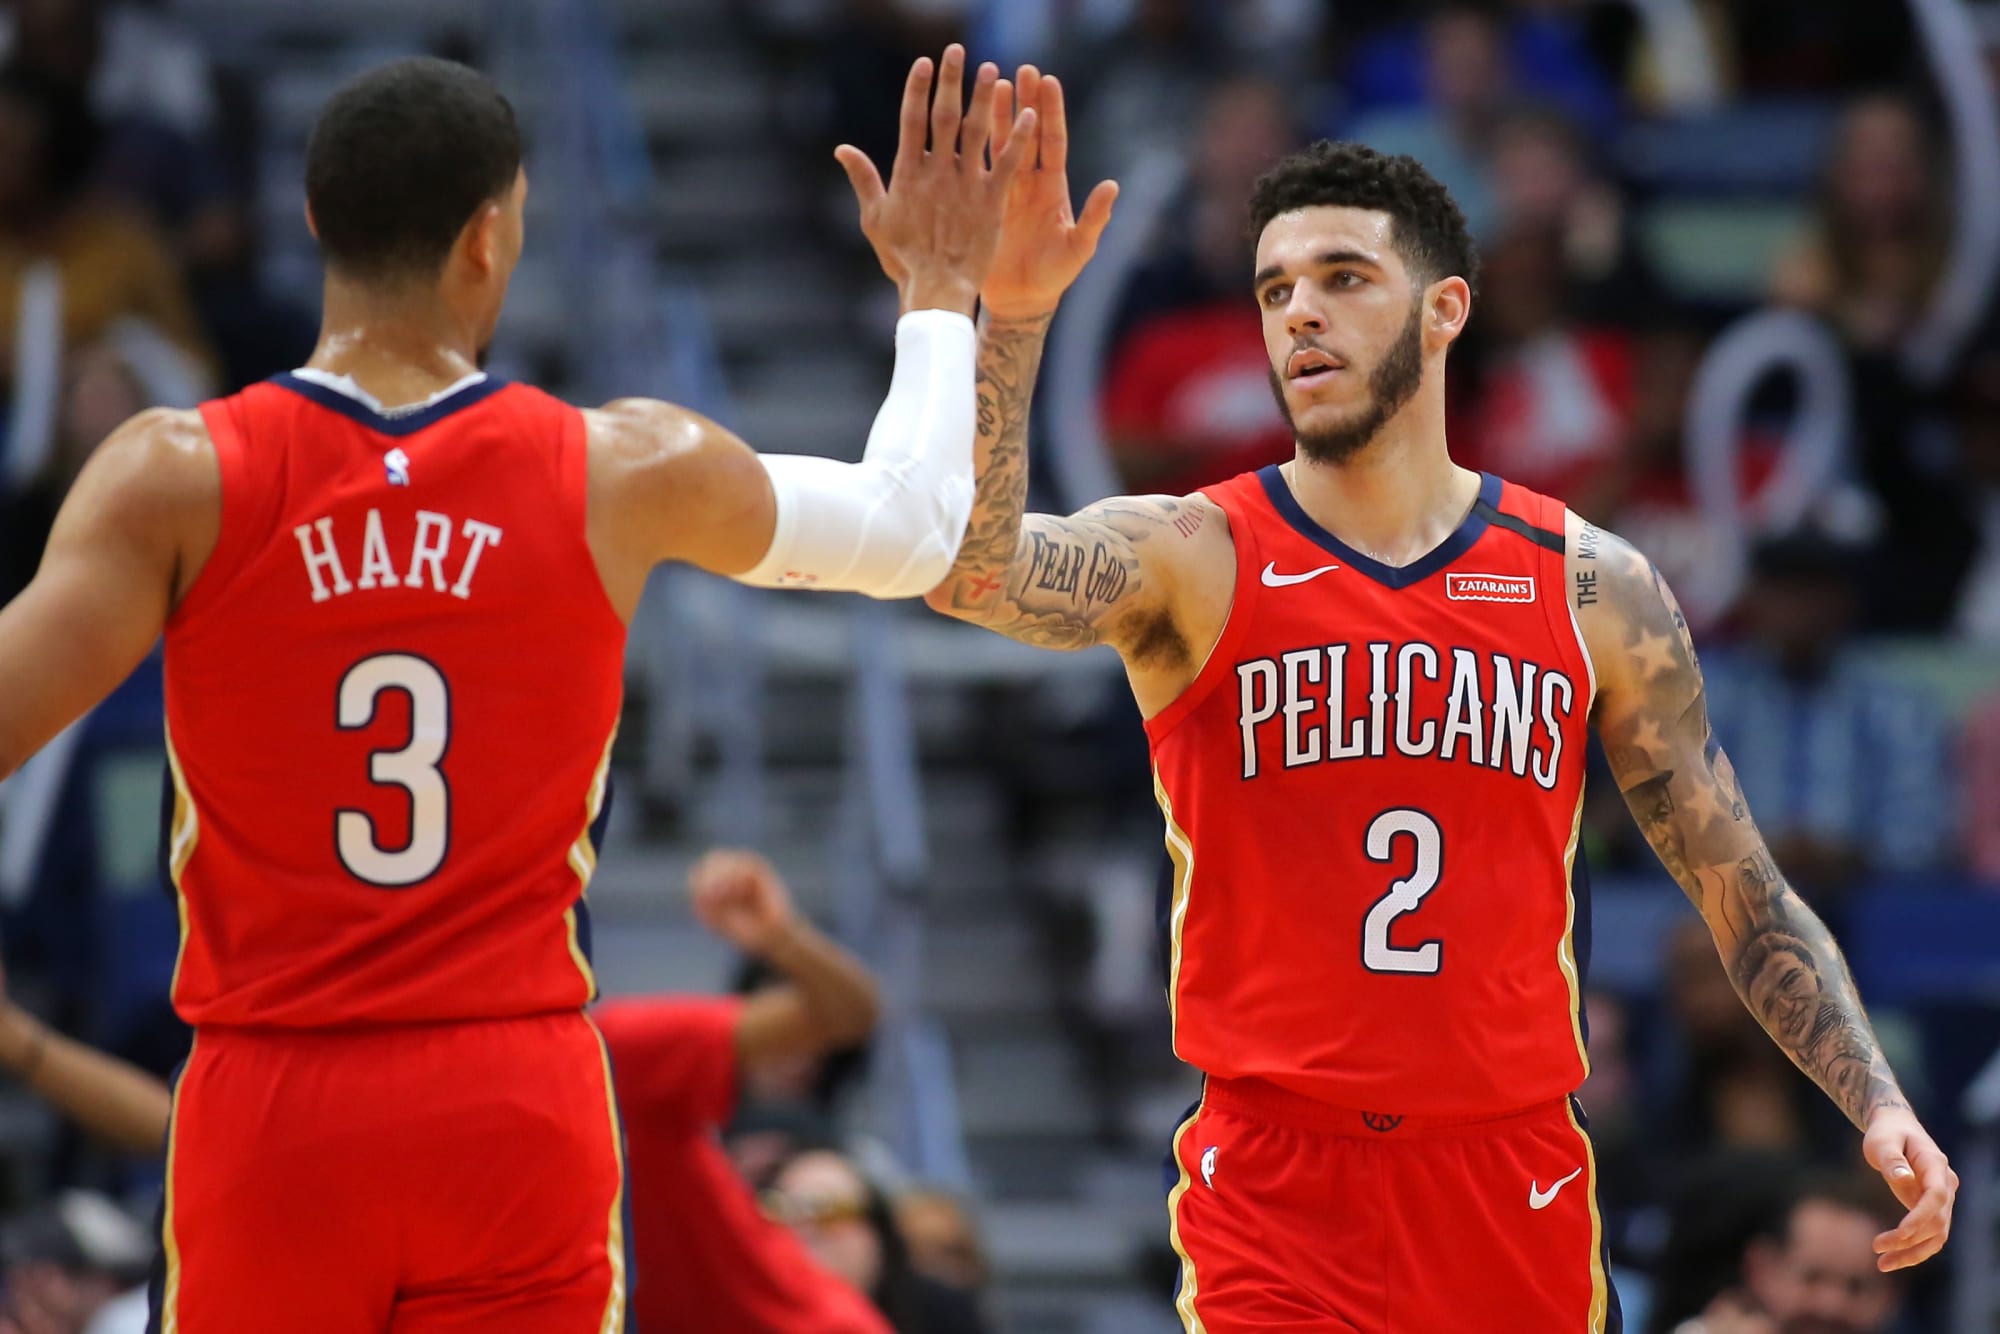 New Orleans Pelicans The roster will be radically different next season